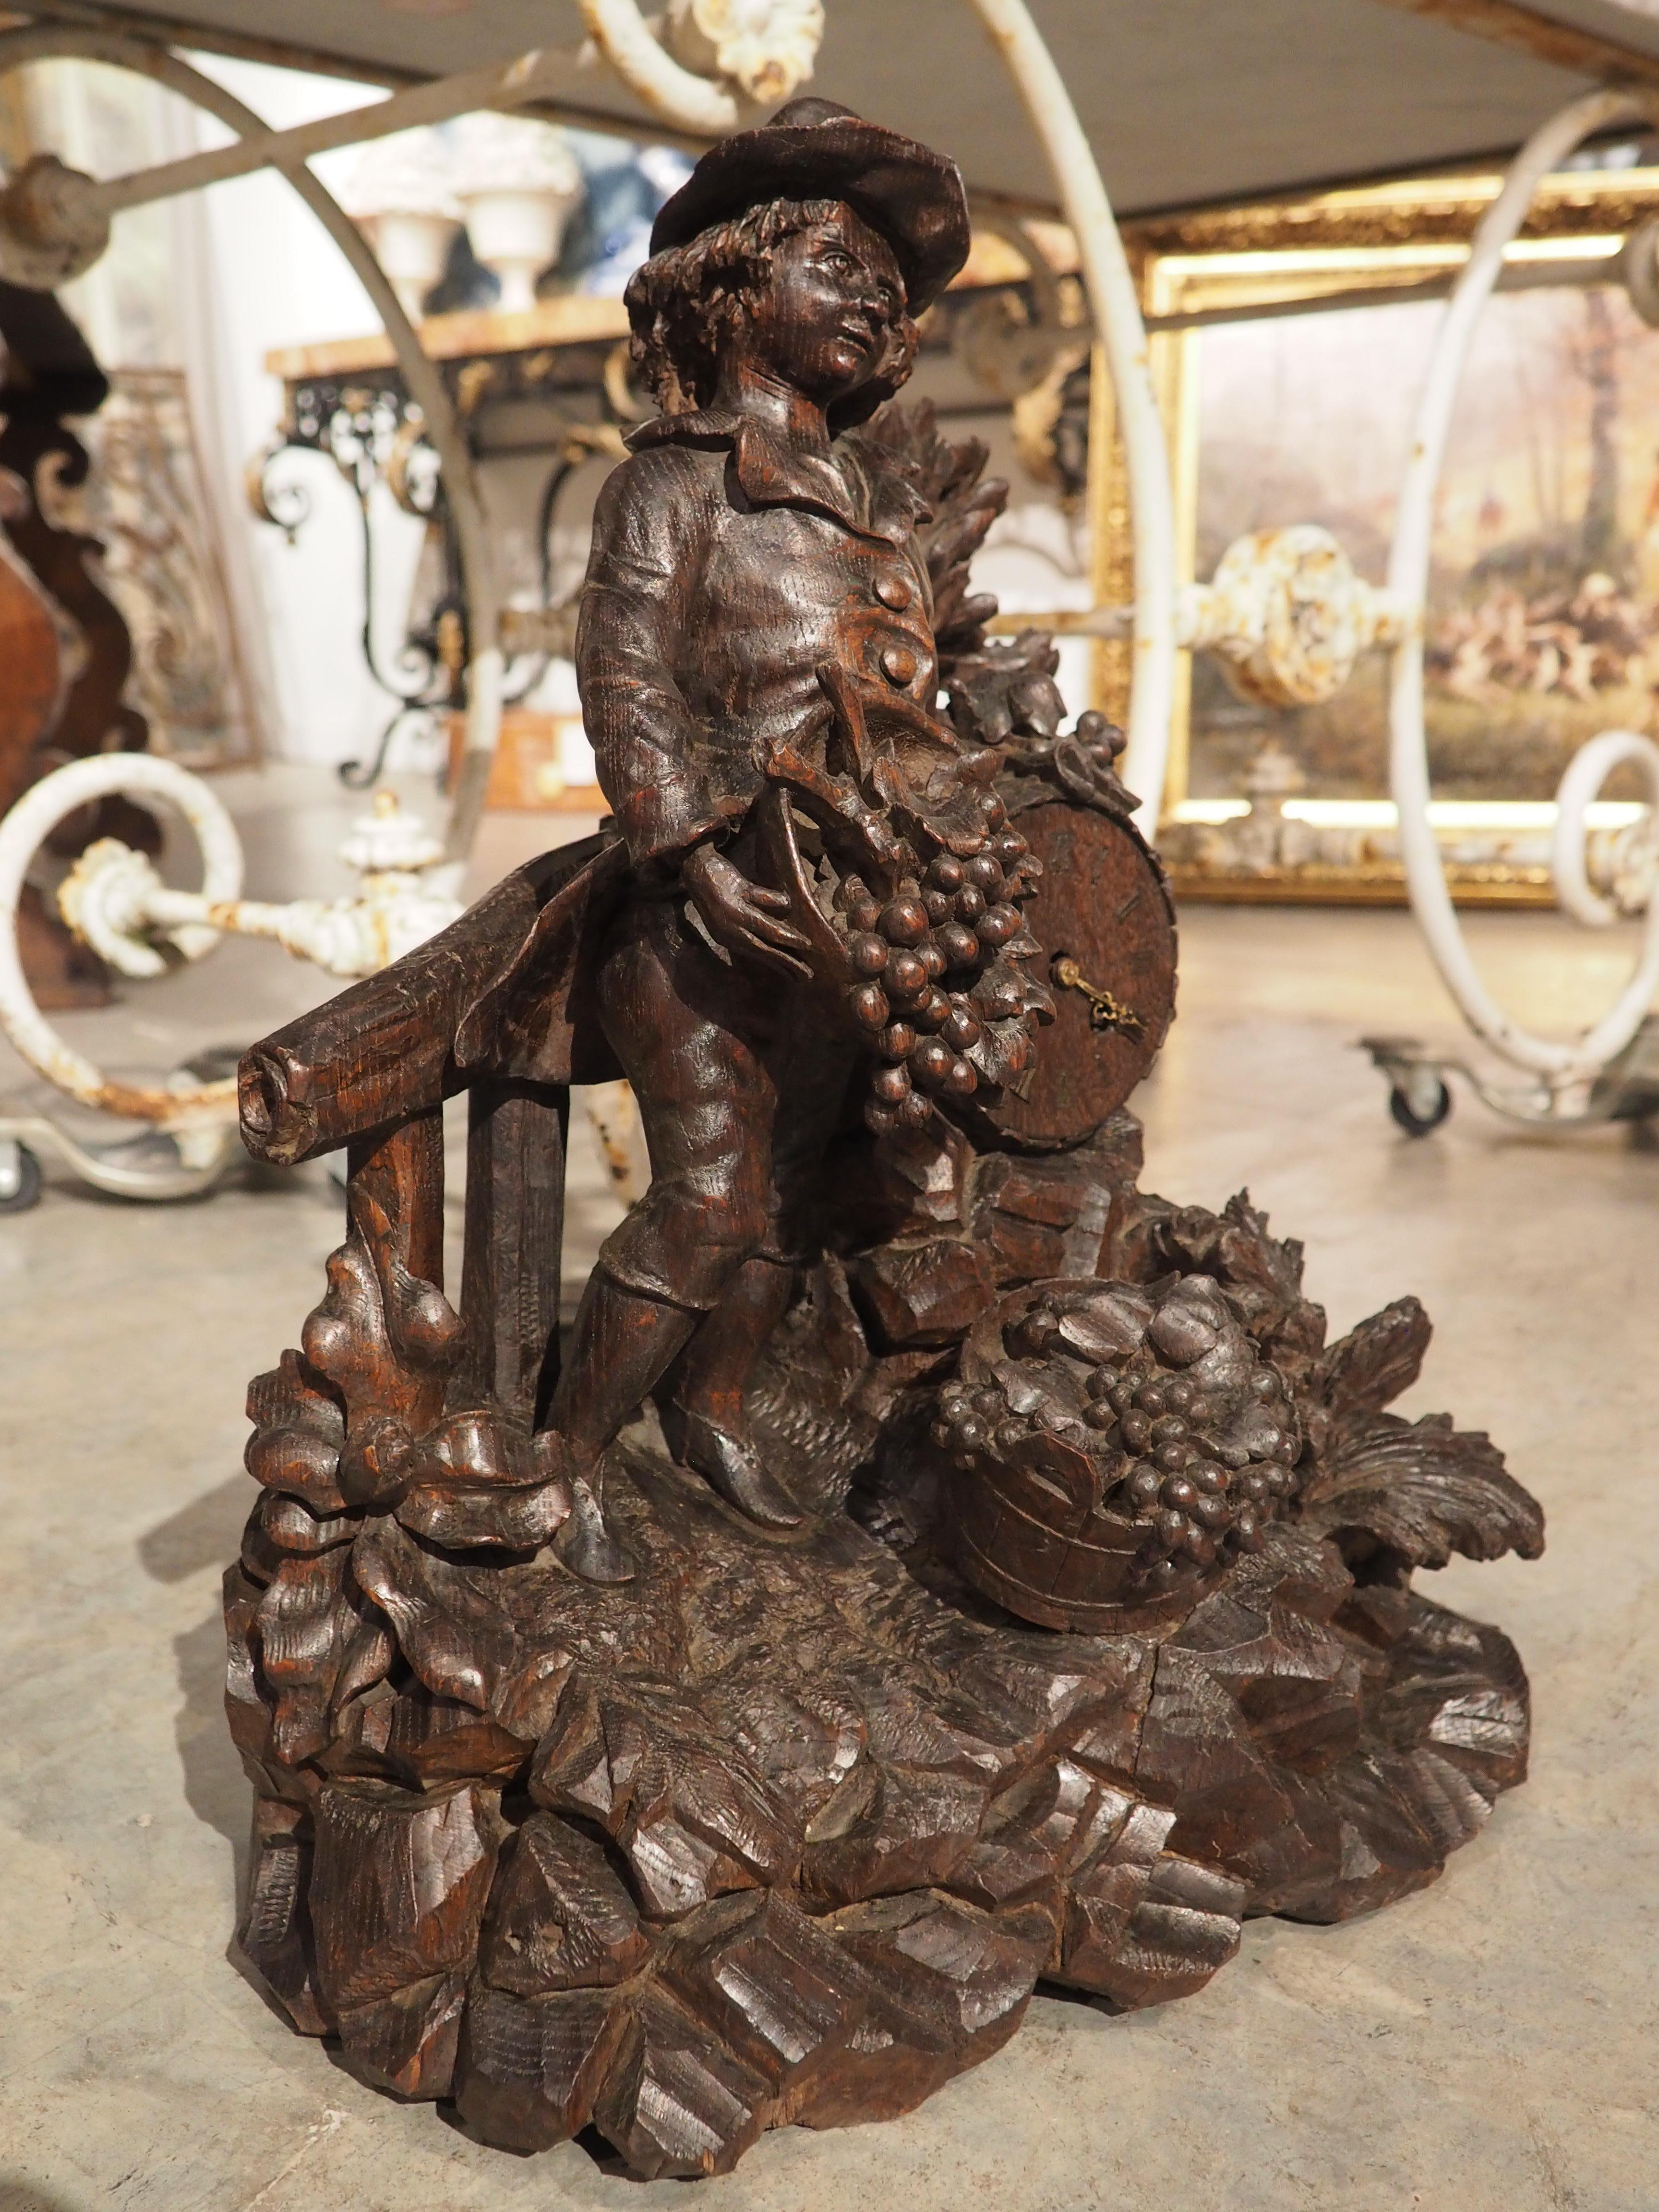 This beautiful sculpture has been carved from solid French oak during the latter half of the 19th century. The style is that of Black Forest, with realistic depictions of branches, leaves, grapes, and more. Originally a French clock, most of the